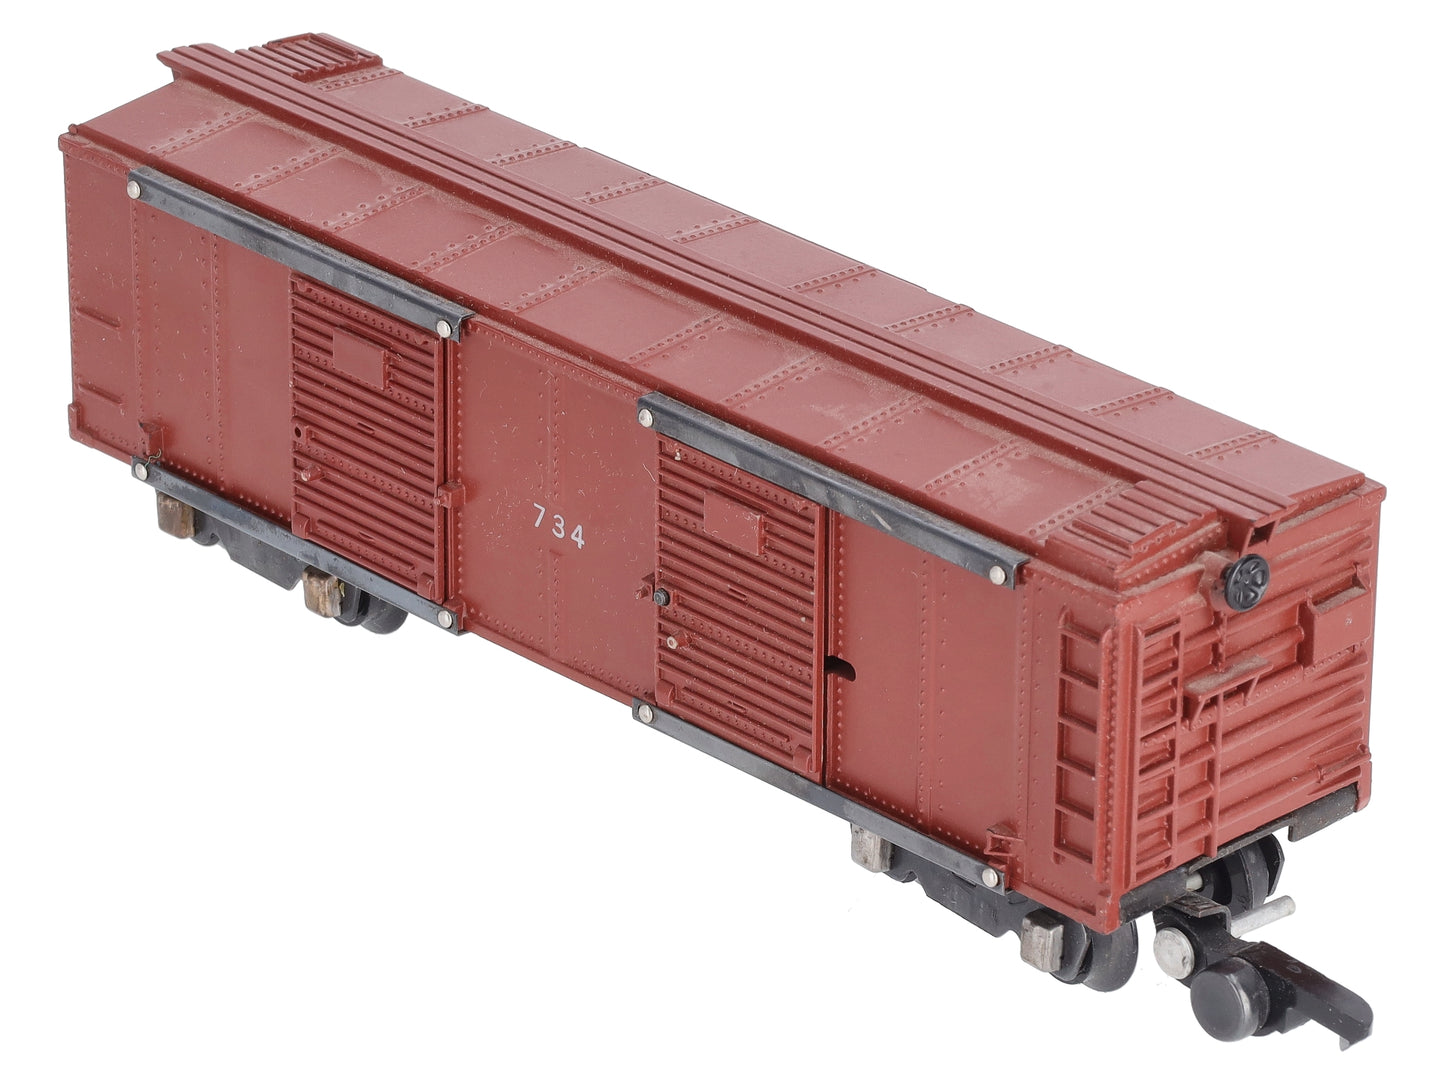 American Flyer 734 Vintage S Operating Boxcar EX